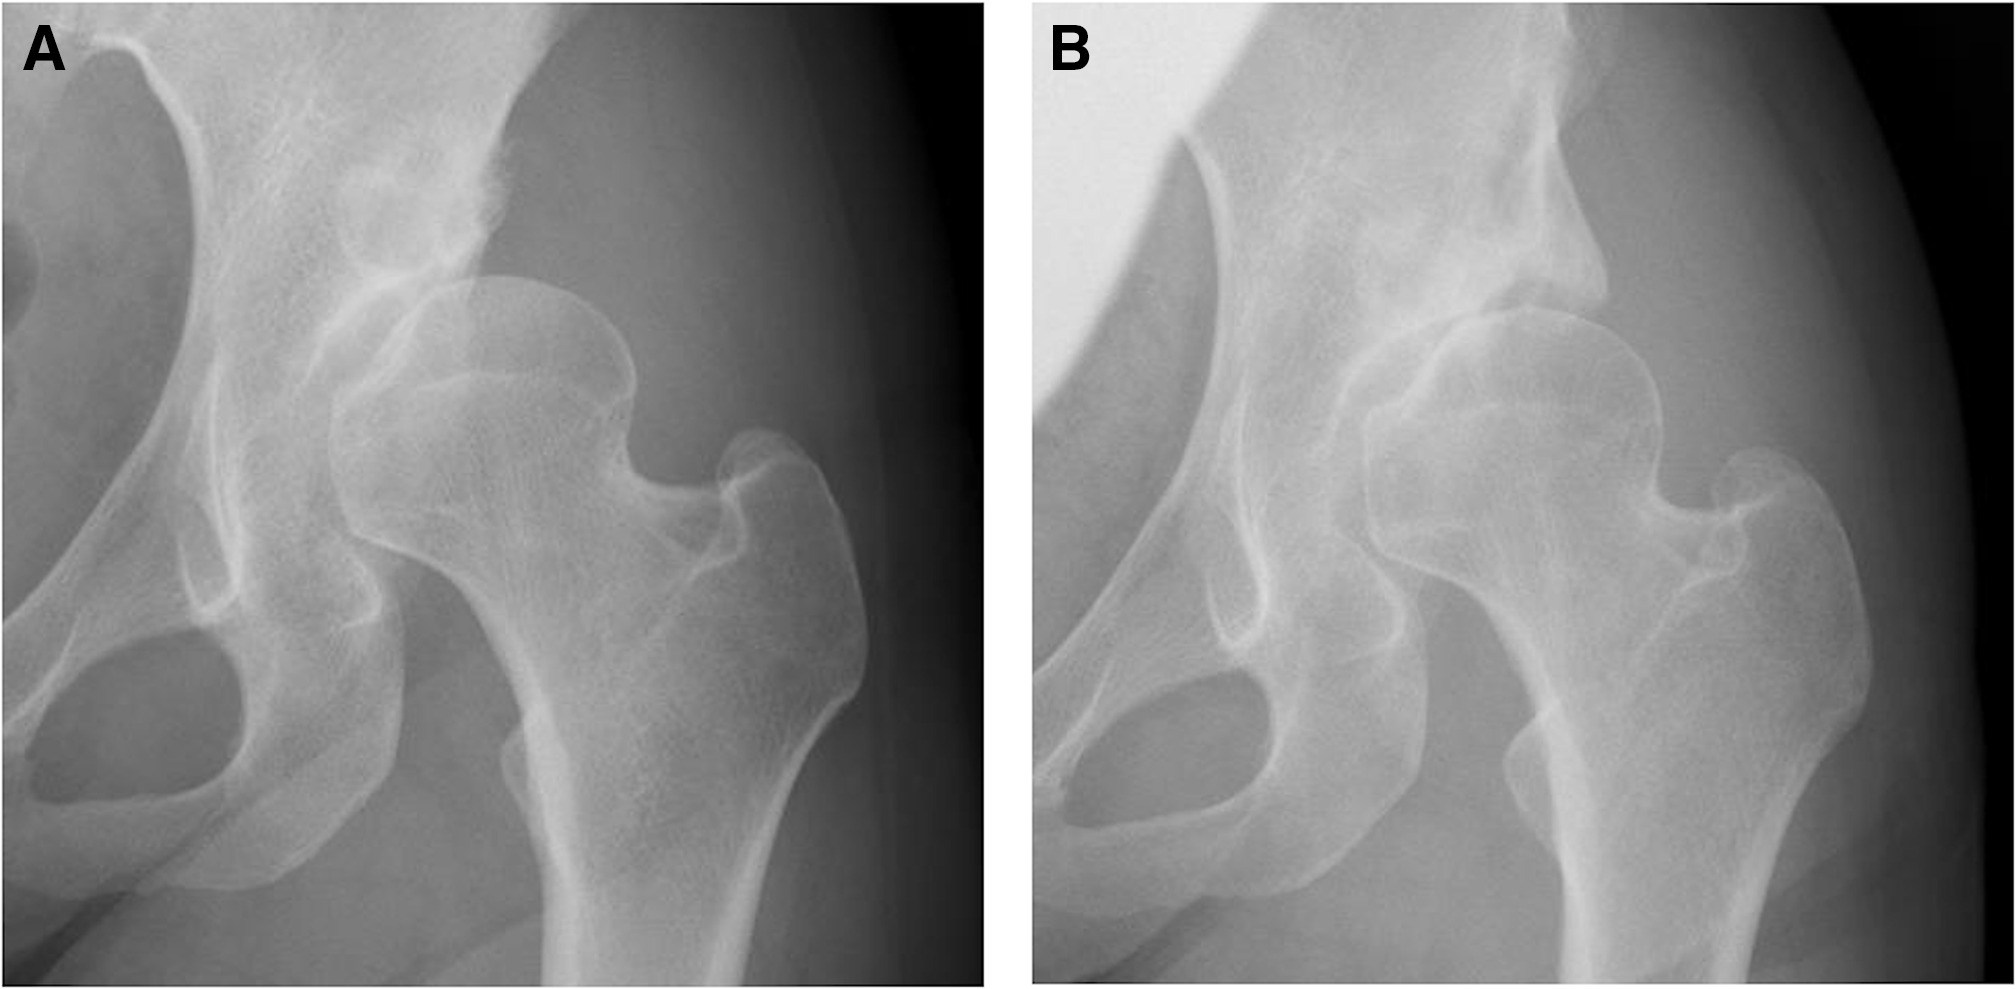 Fig. 6 
          Radiographs ofa 44-year-old female who had undergone a modified Spitzy shelf acetabuloplasty on the left hip: a) preoperatively, osteoarthritis Tönnis grade 2 with bone cyst, a lateral centre-edge angle of 0° (Merle d’Aubigné clinical score, 8 points), and b) at 12 years postoperatively, osteoarthritis Tönnis grade 2, a lateral centre-edge angle of 35° (Merle d’Aubigné clinical score, 16 points).
        